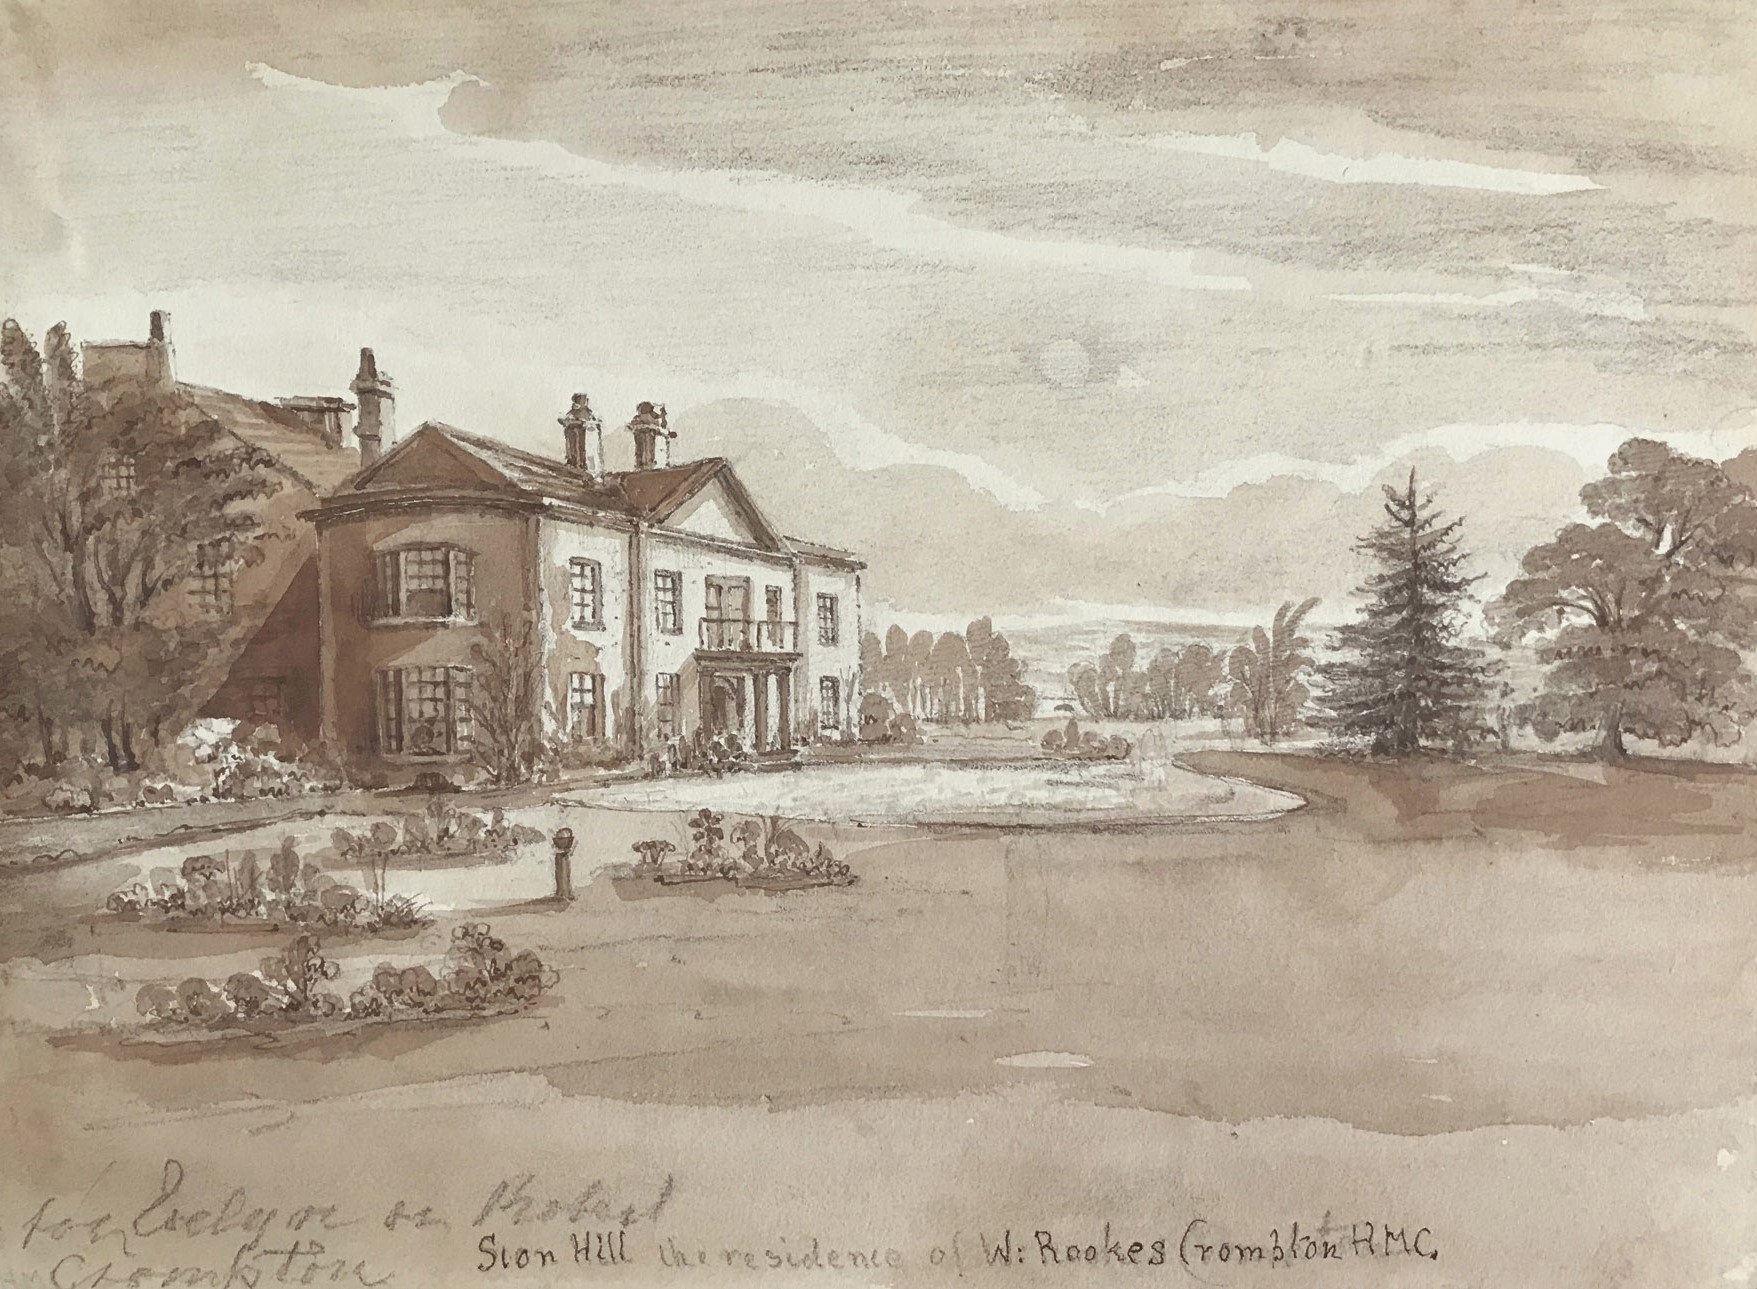 Original Sion Hill mansion at Kirby Wiske, c. 1848.